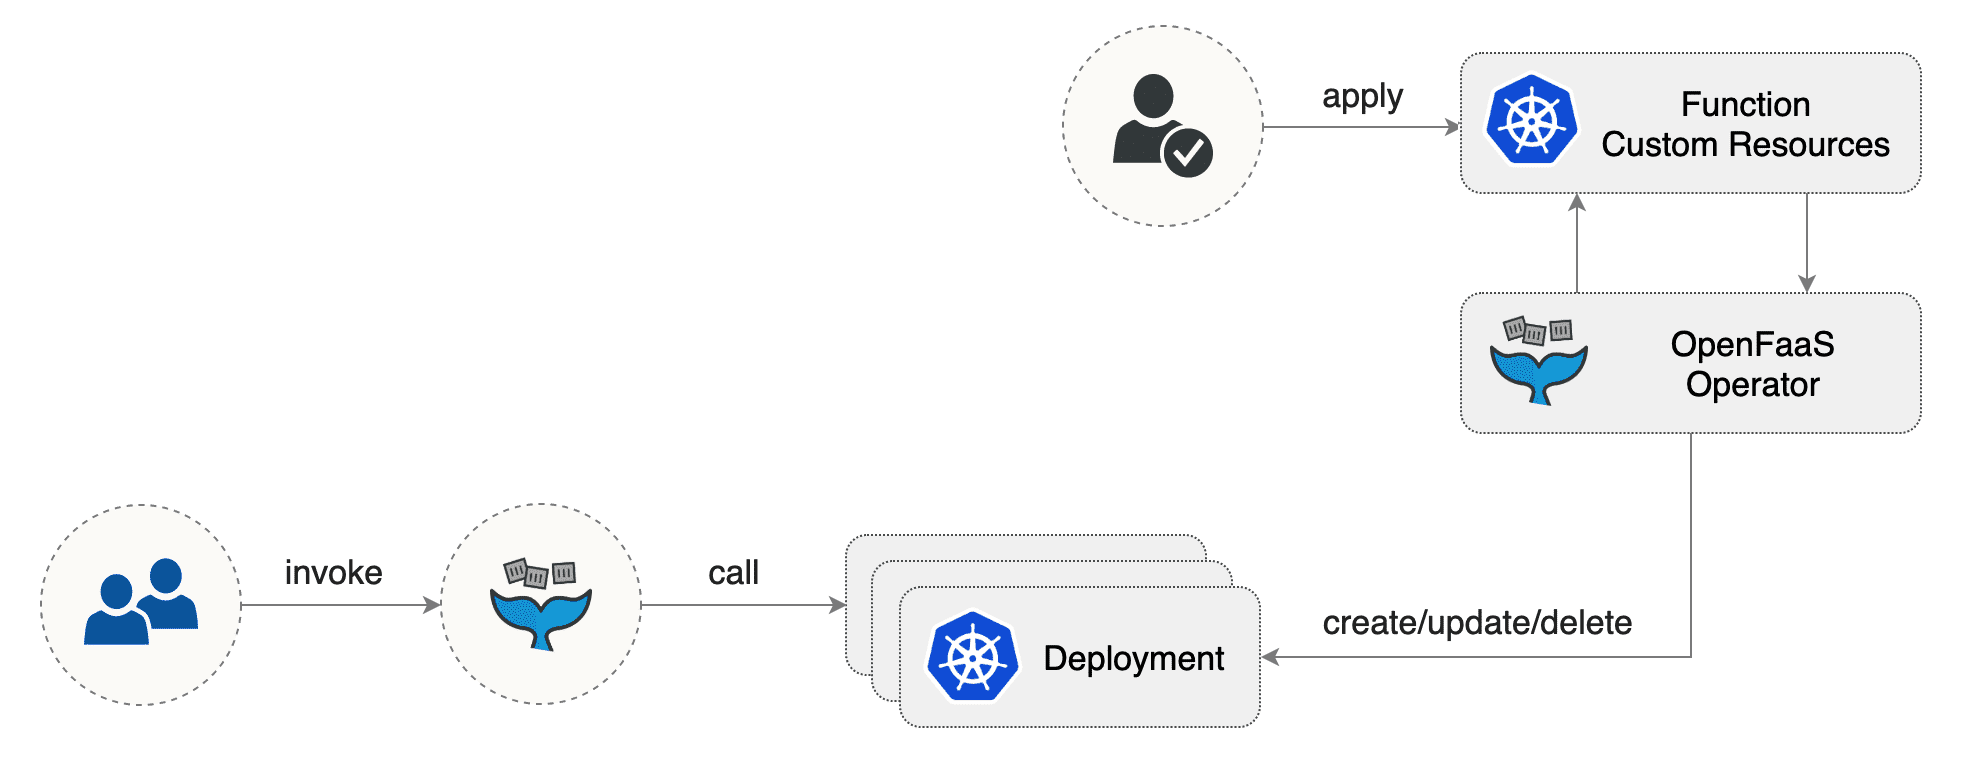 Using the CRD to deploy functions with kubectl